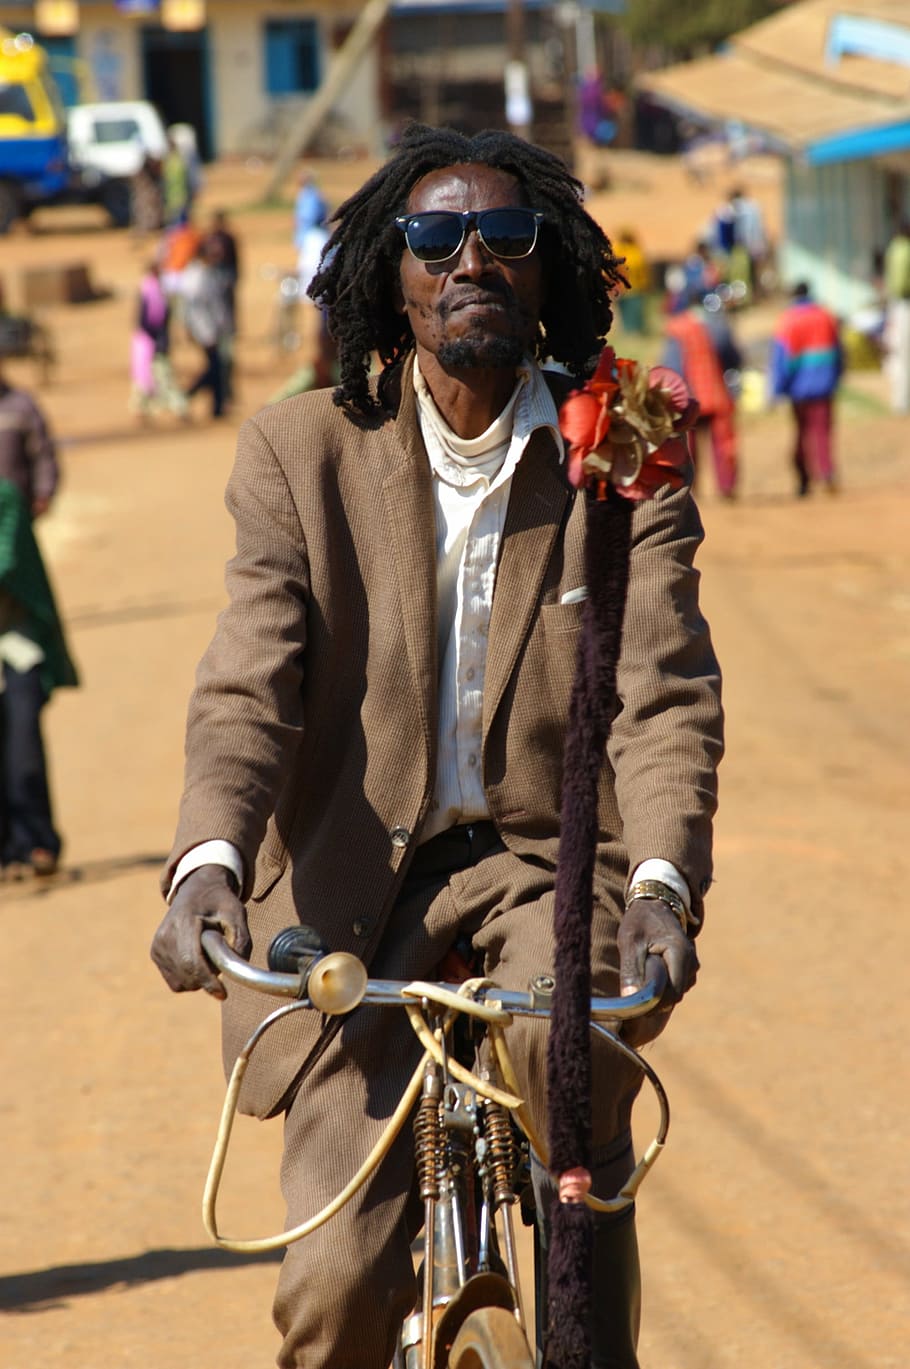 a real dreadlocks, bike event, the village's main street, people, men, bicycle, street, outdoors, cycling, city Life